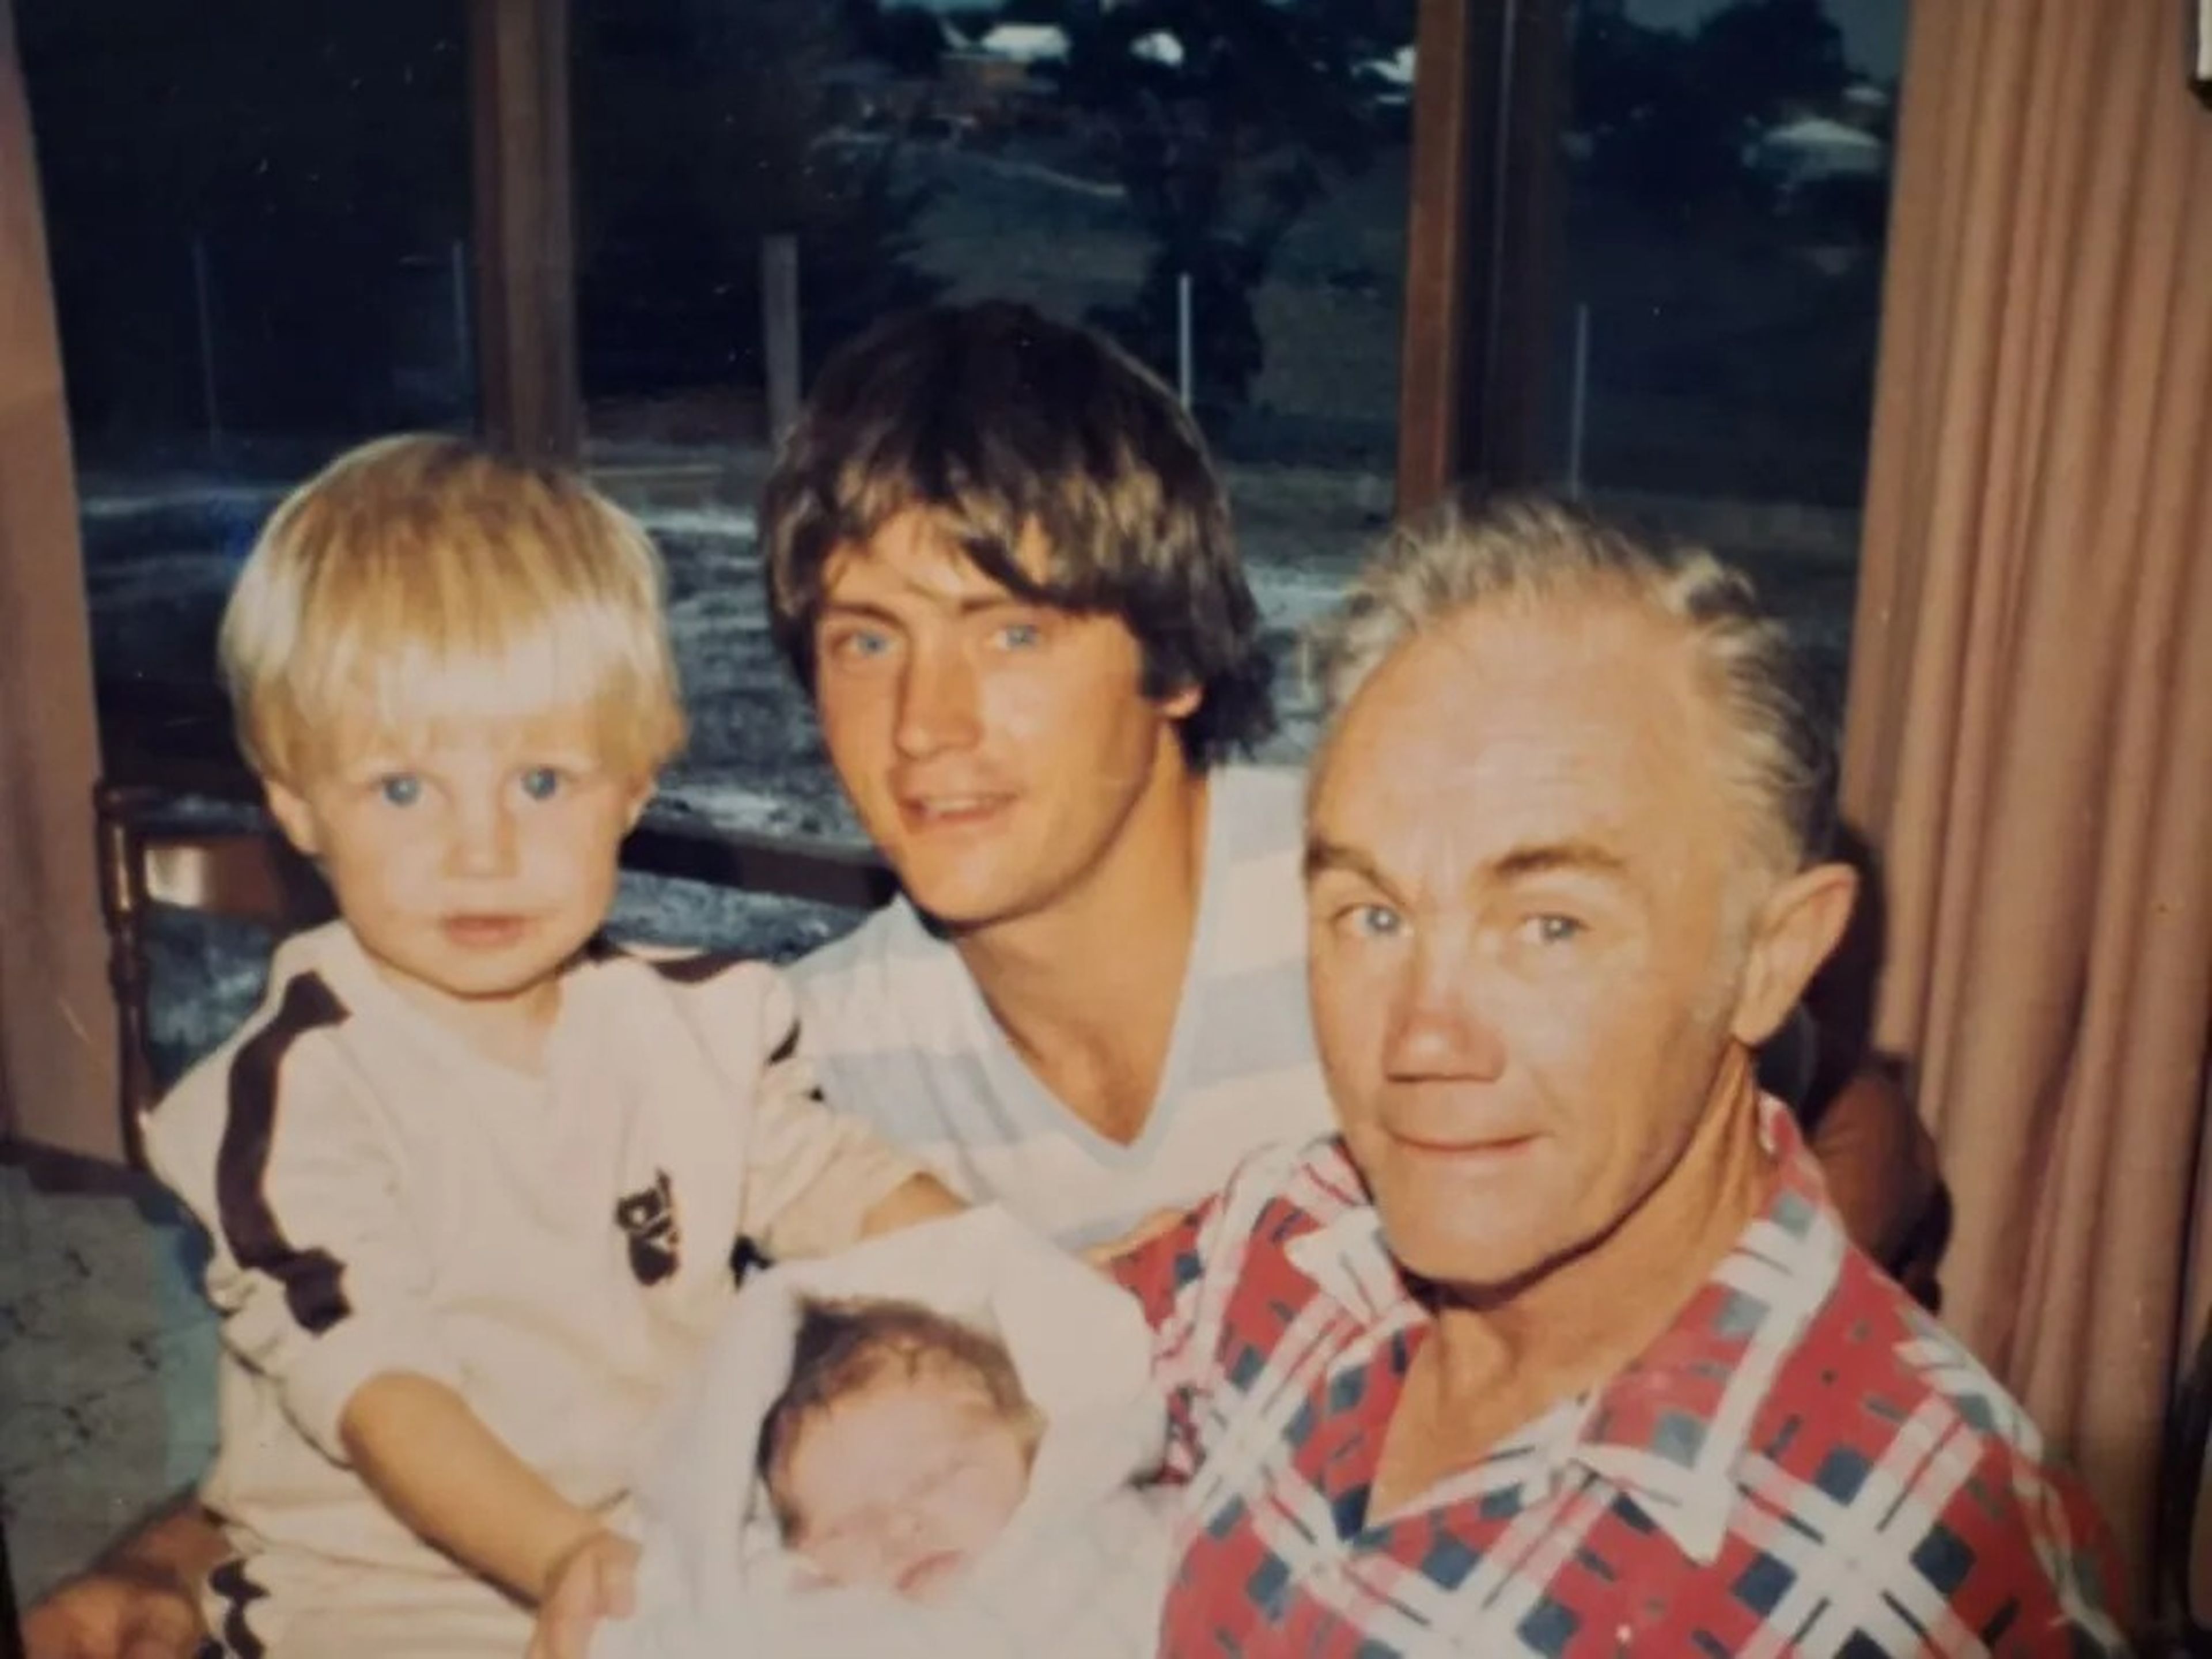 John Salton (middle) with his father (right) and his two kids.